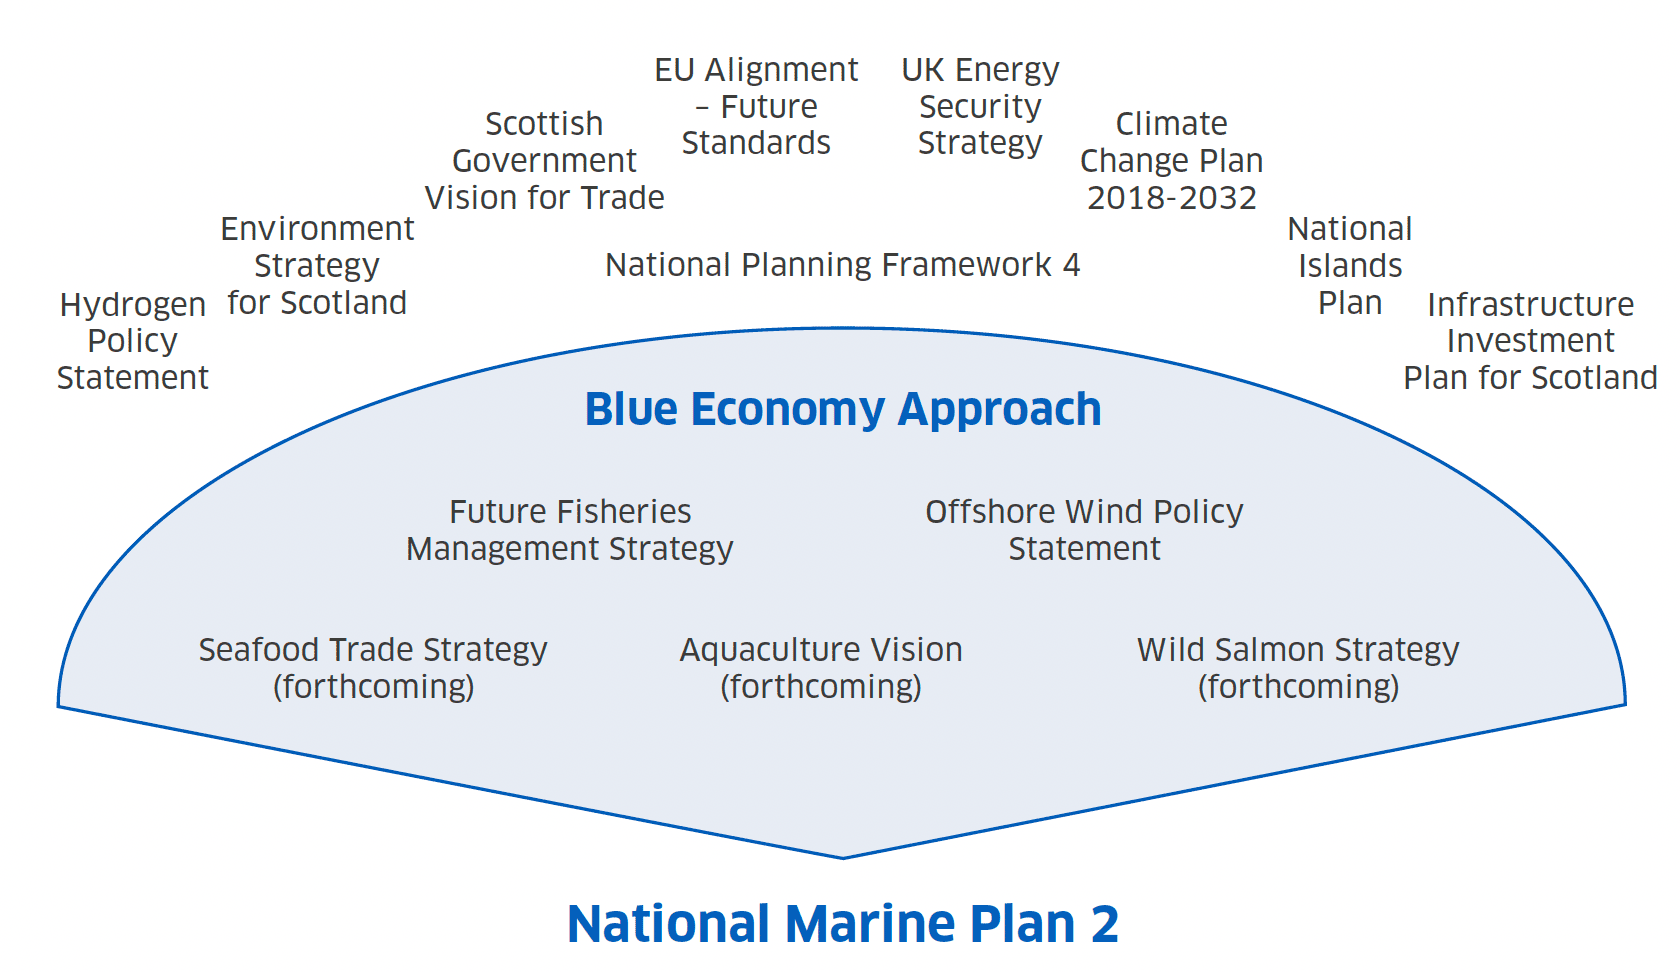 Summary of new policy drivers for Scotland’s second National Marine Plan, including: Hydrogen policy statement, Environment Strategy for Scotland, Scottish Government Vision for Trade, EU Alignment – Future Standards, National Planning Framework 4, UK Energy Security Strategy, Climate Change Plan 2018-2032, National Islands Plan, Infrastructure Investment Plan for Scotland, Seafood Trade Strategy (forthcoming), Aquaculture vision (forthcoming), Wild Salmon Strategy (forthcoming), Offshore Wind policy statement, Future Fisheries Management Strategy.  